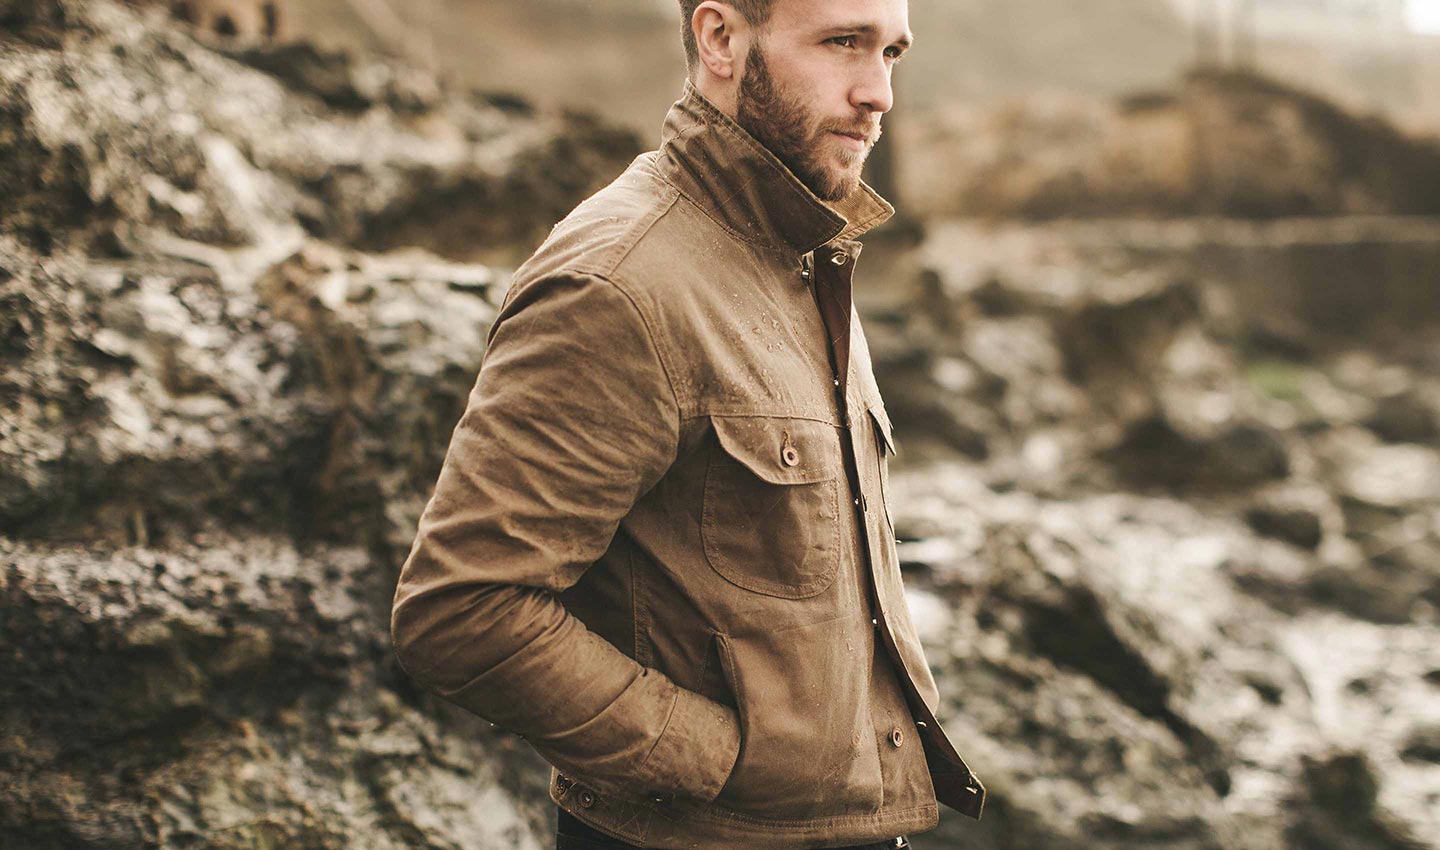 taylor stitch long haul jacket in waxed canvas